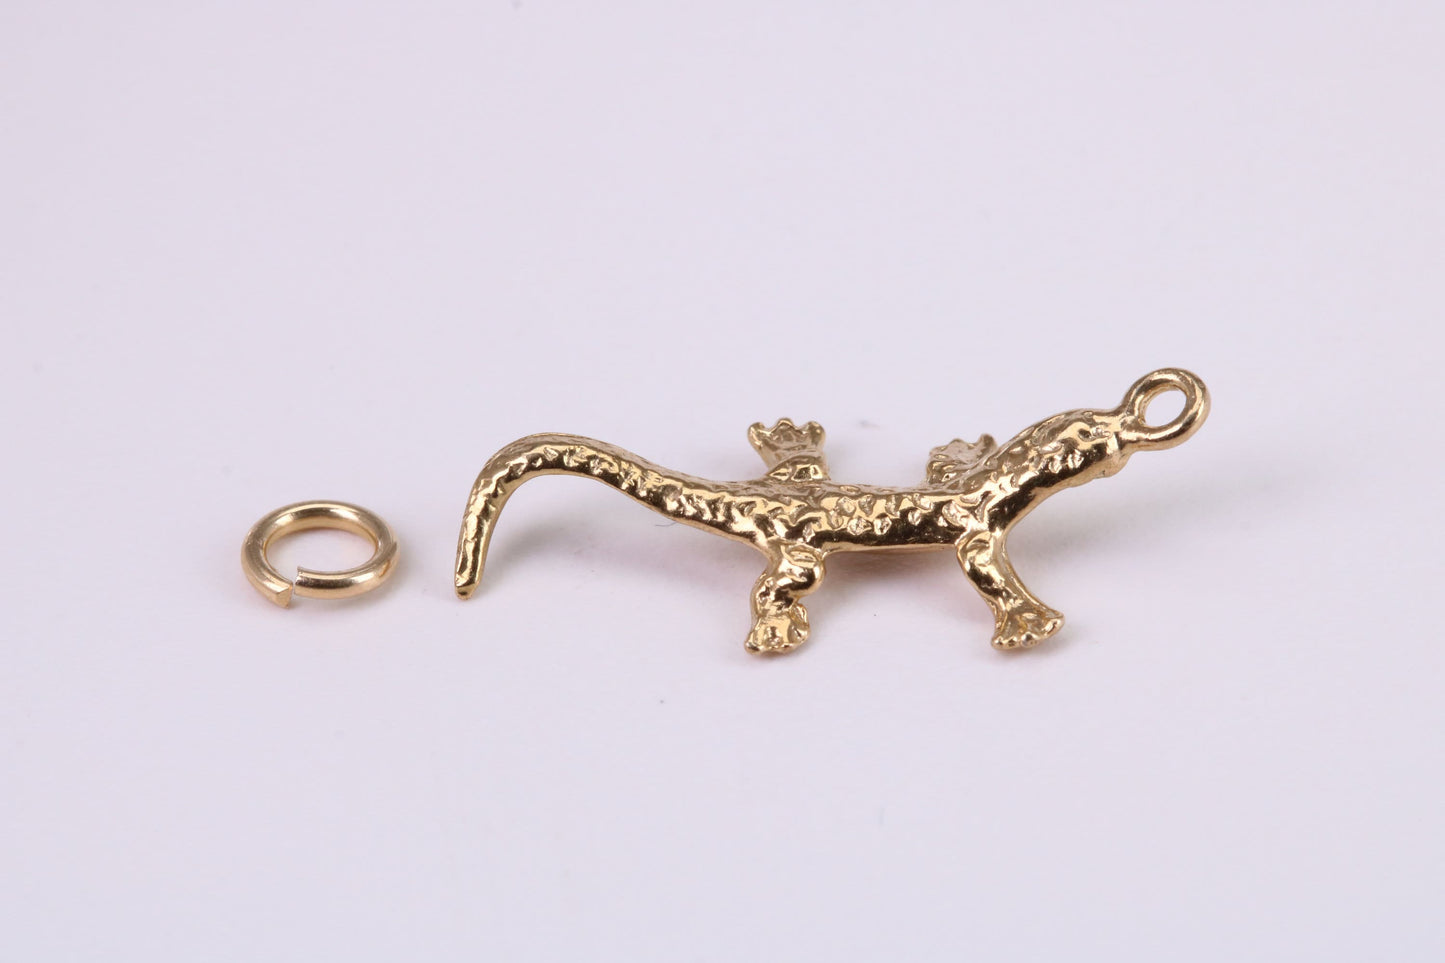 Gecko Lizard Charm, Traditional Charm, Made from Solid Yellow Gold, British Hallmarked, Complete with Attachment Link